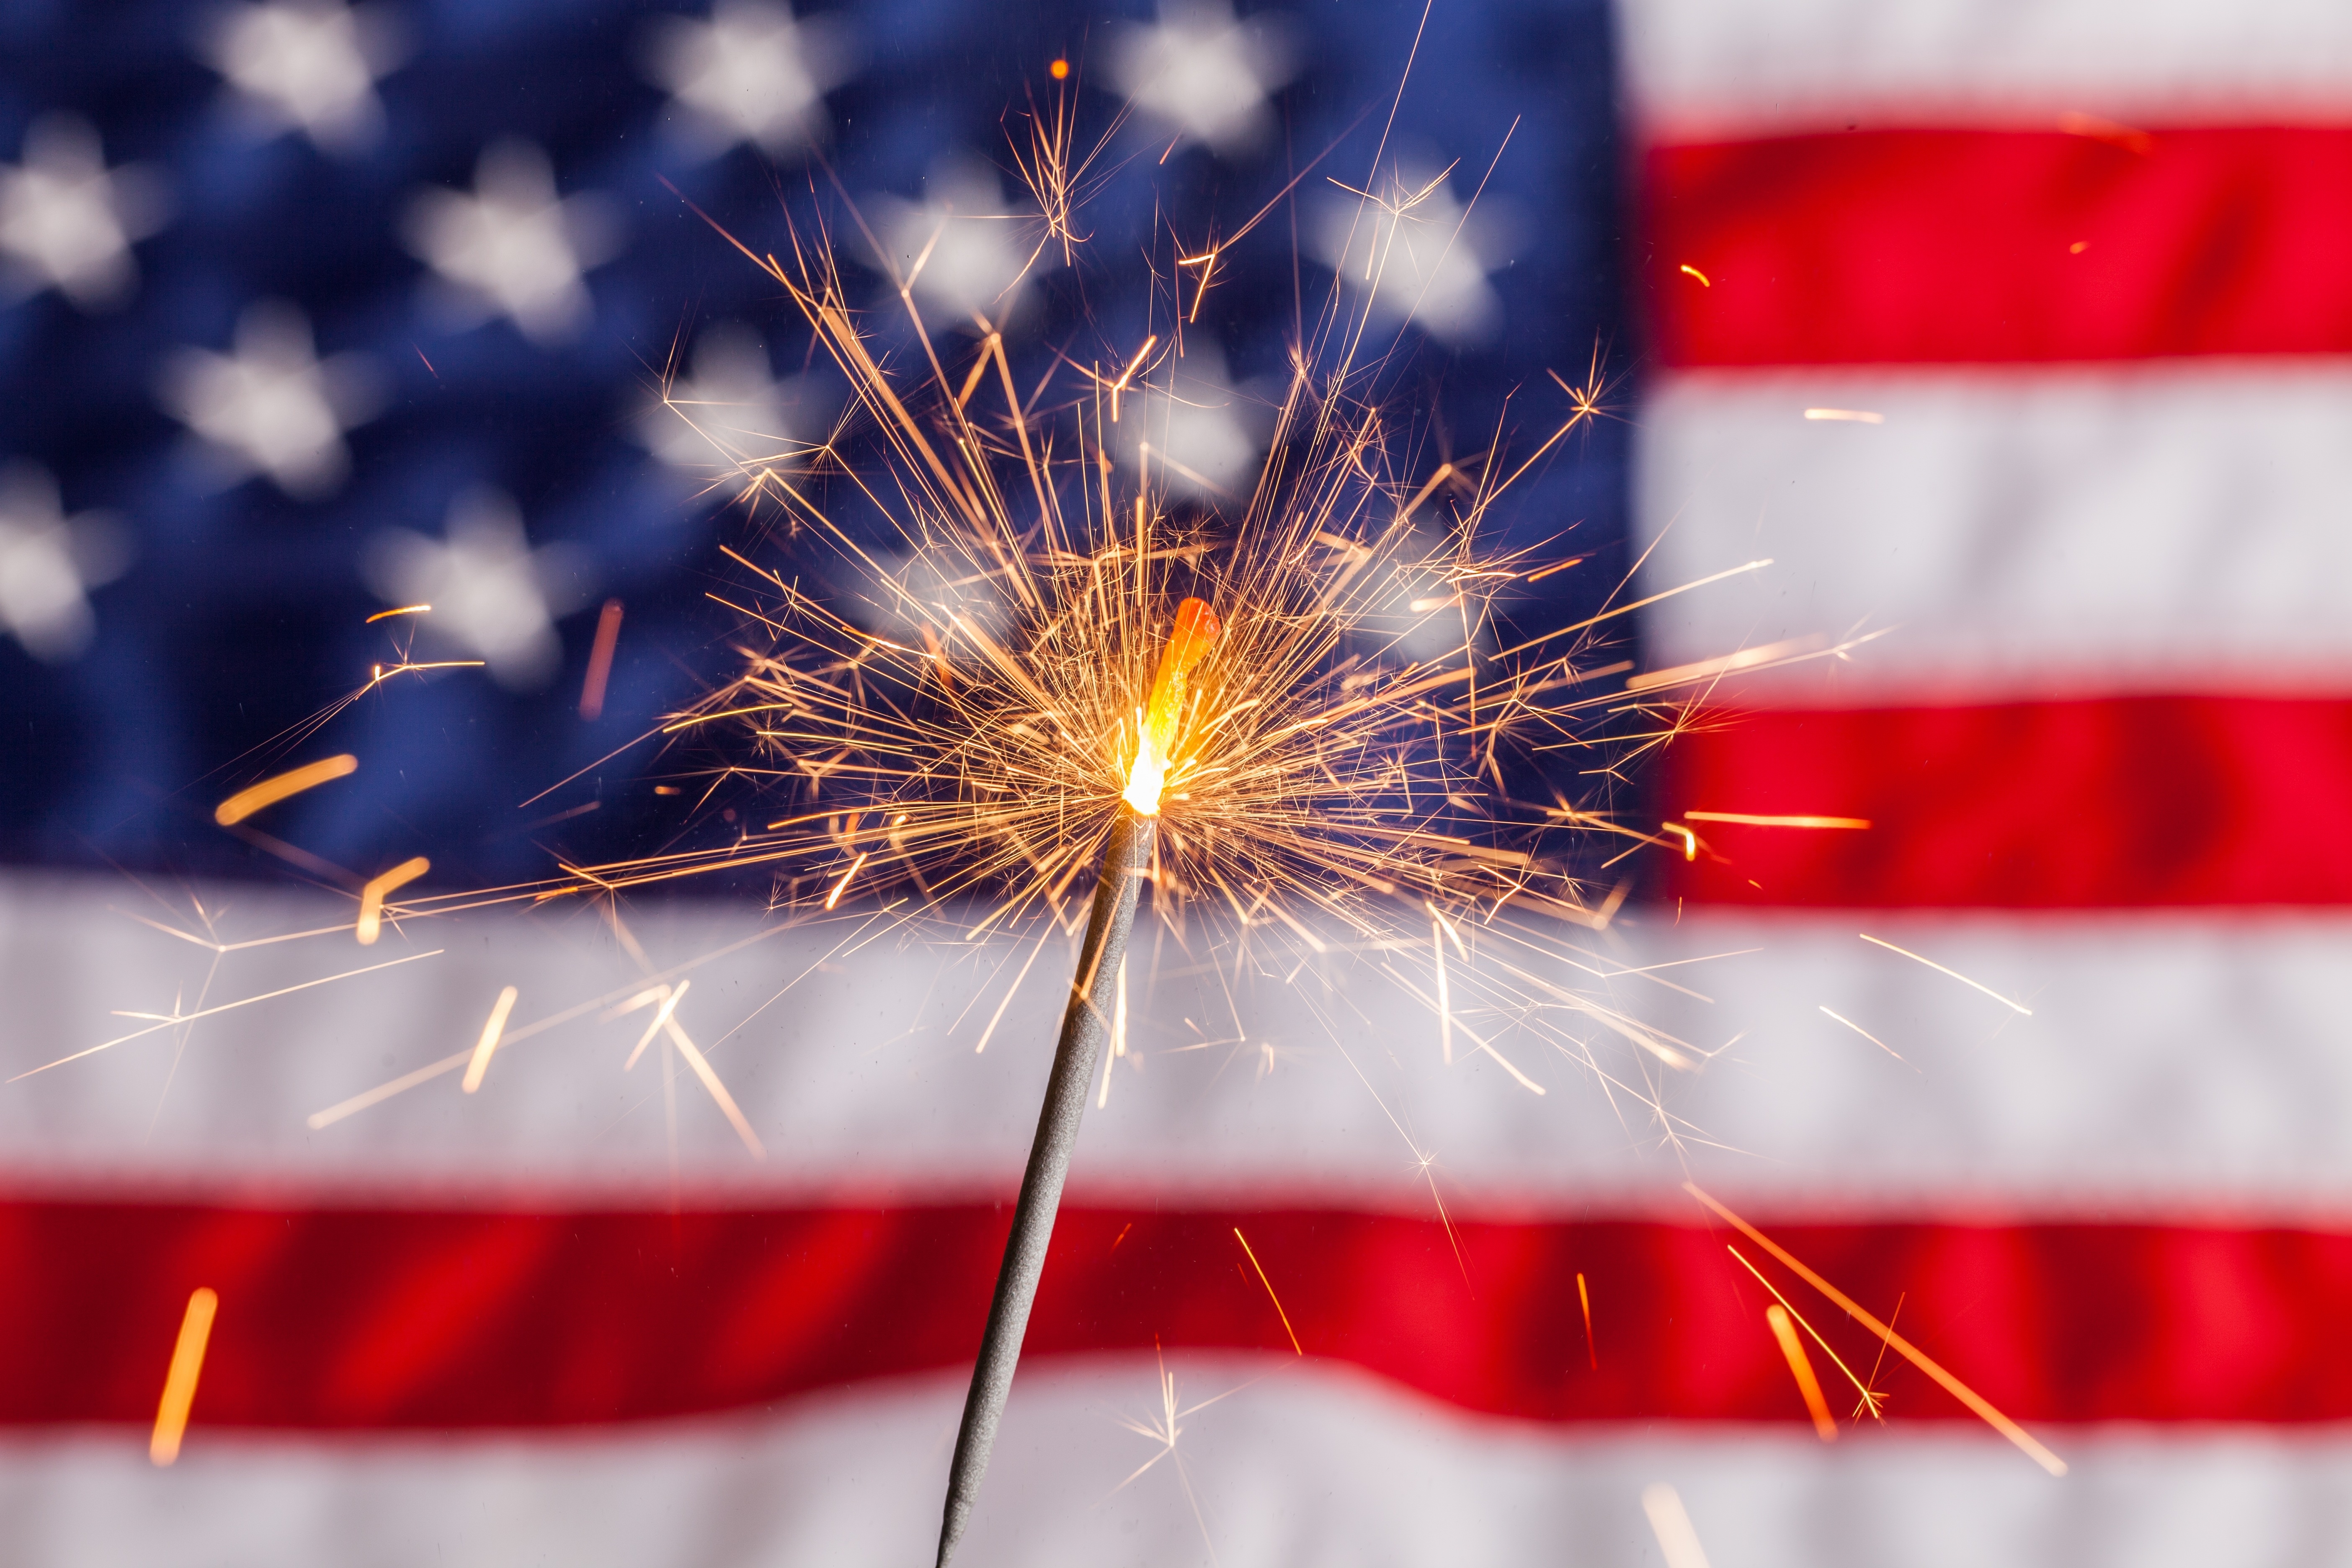 blog image of a sparkler in front of an american flag; blog title: Enjoy A Safe and Fun Fourth of July at Your Apartment